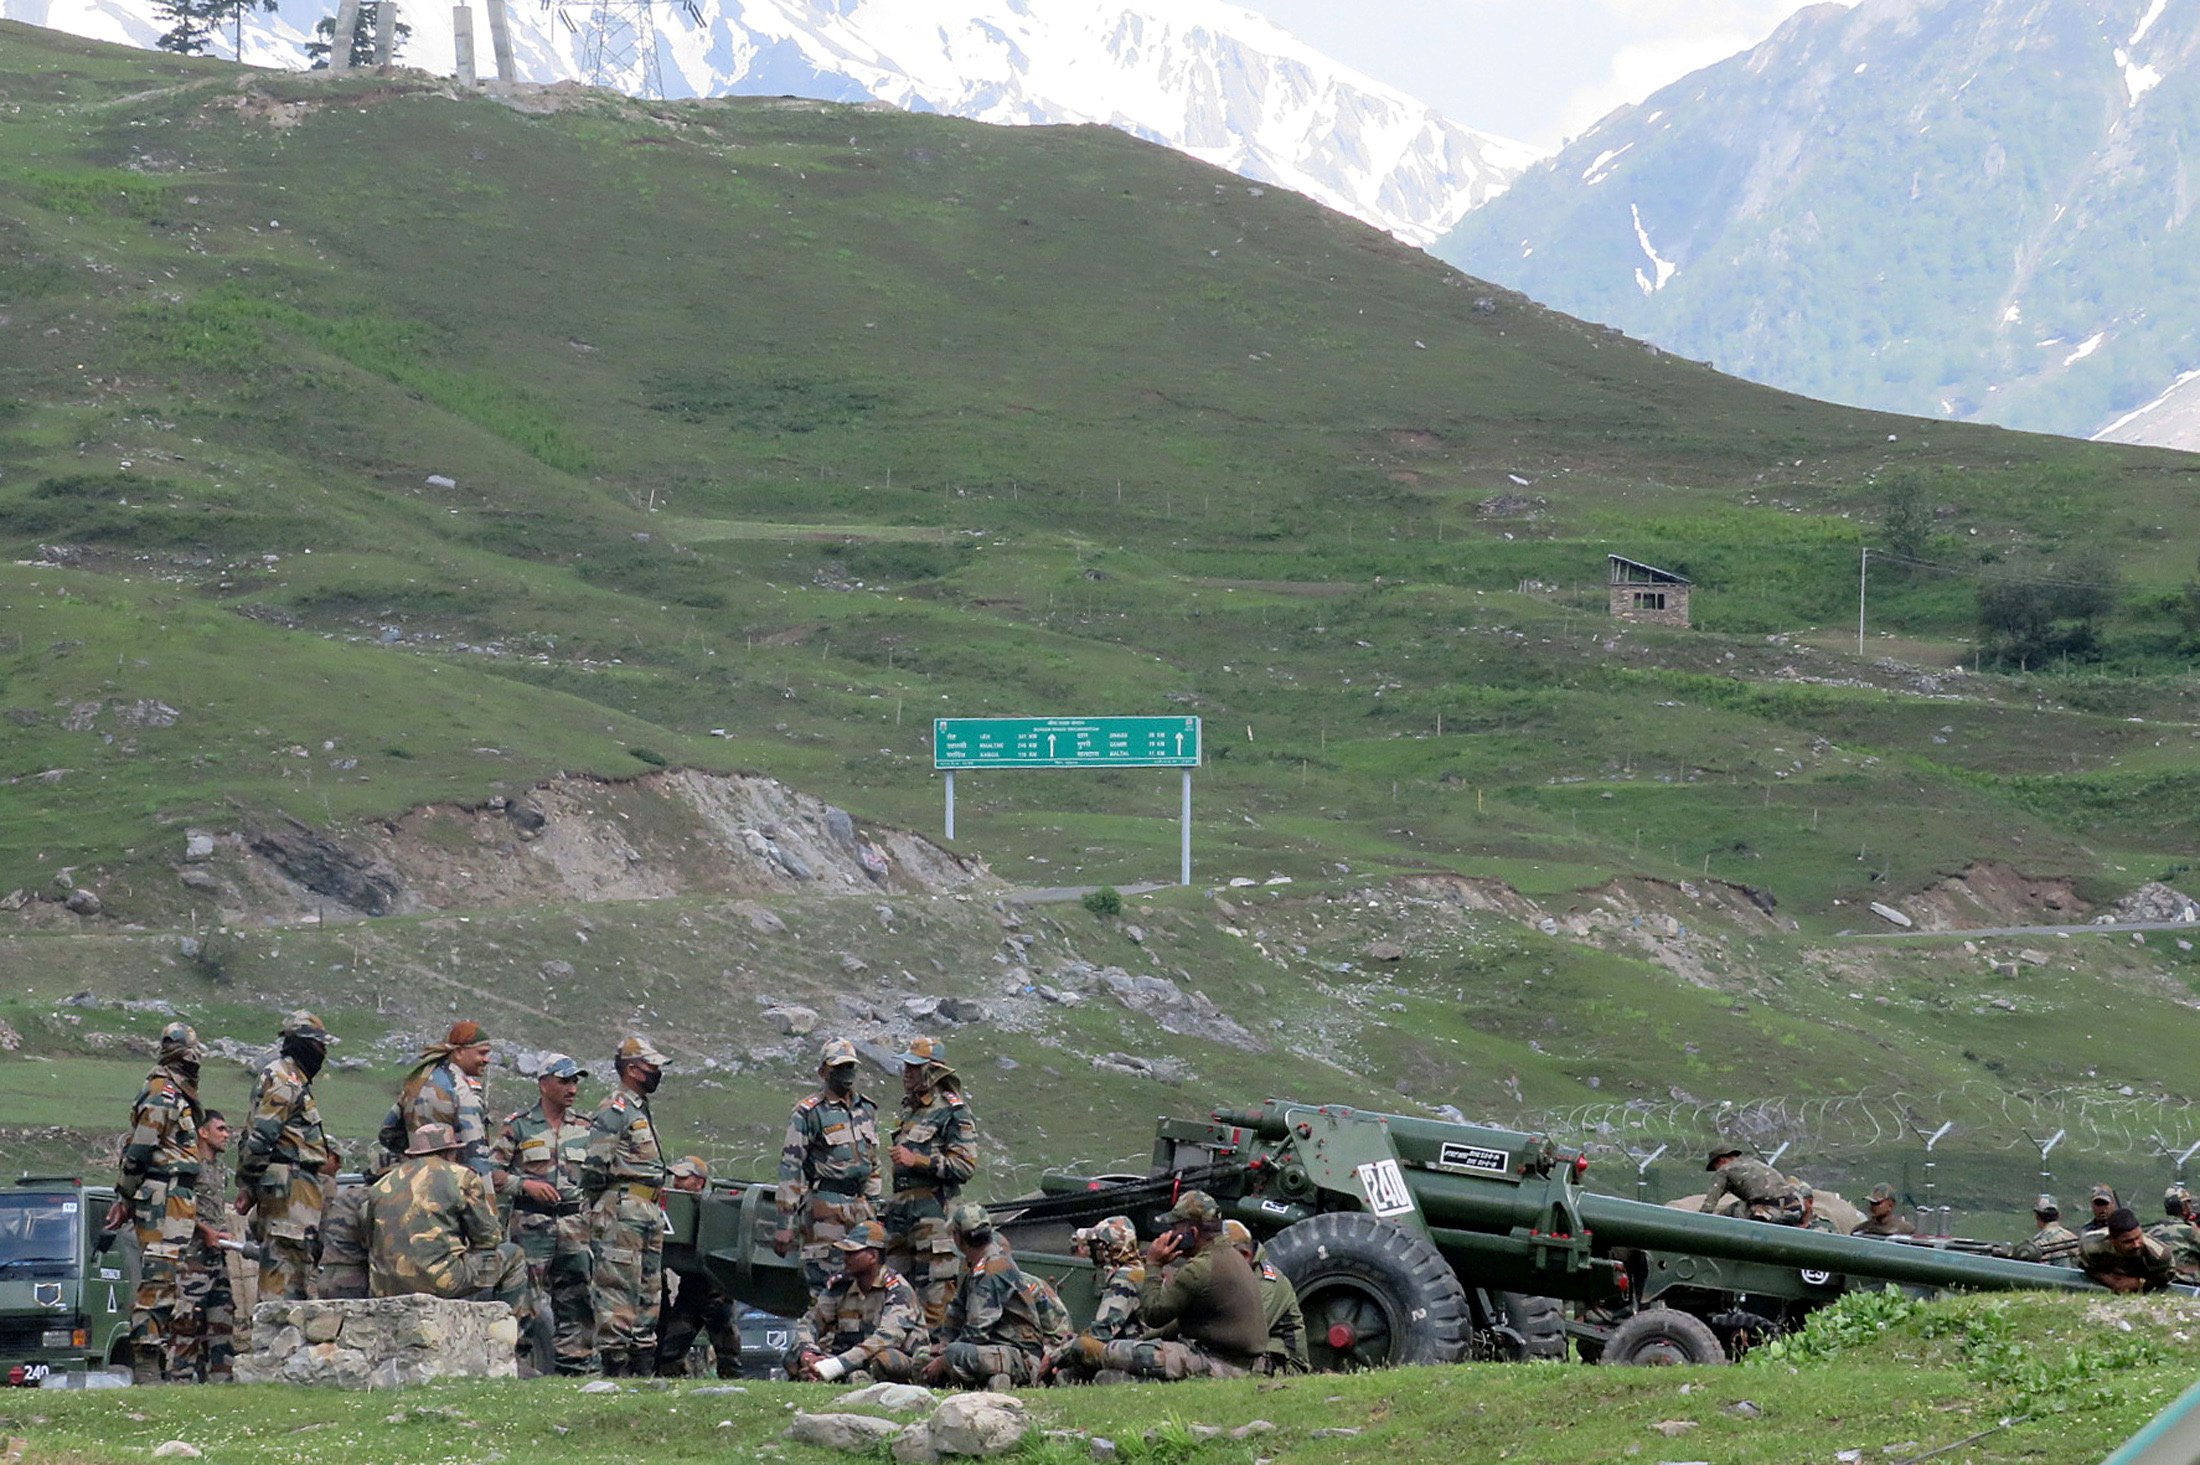 Indian army soldiers rest next to artillery guns at a makeshift transit camp before heading to Ladakh, near Baltal, southeast of Srinagar (REUTERS/Stringer)